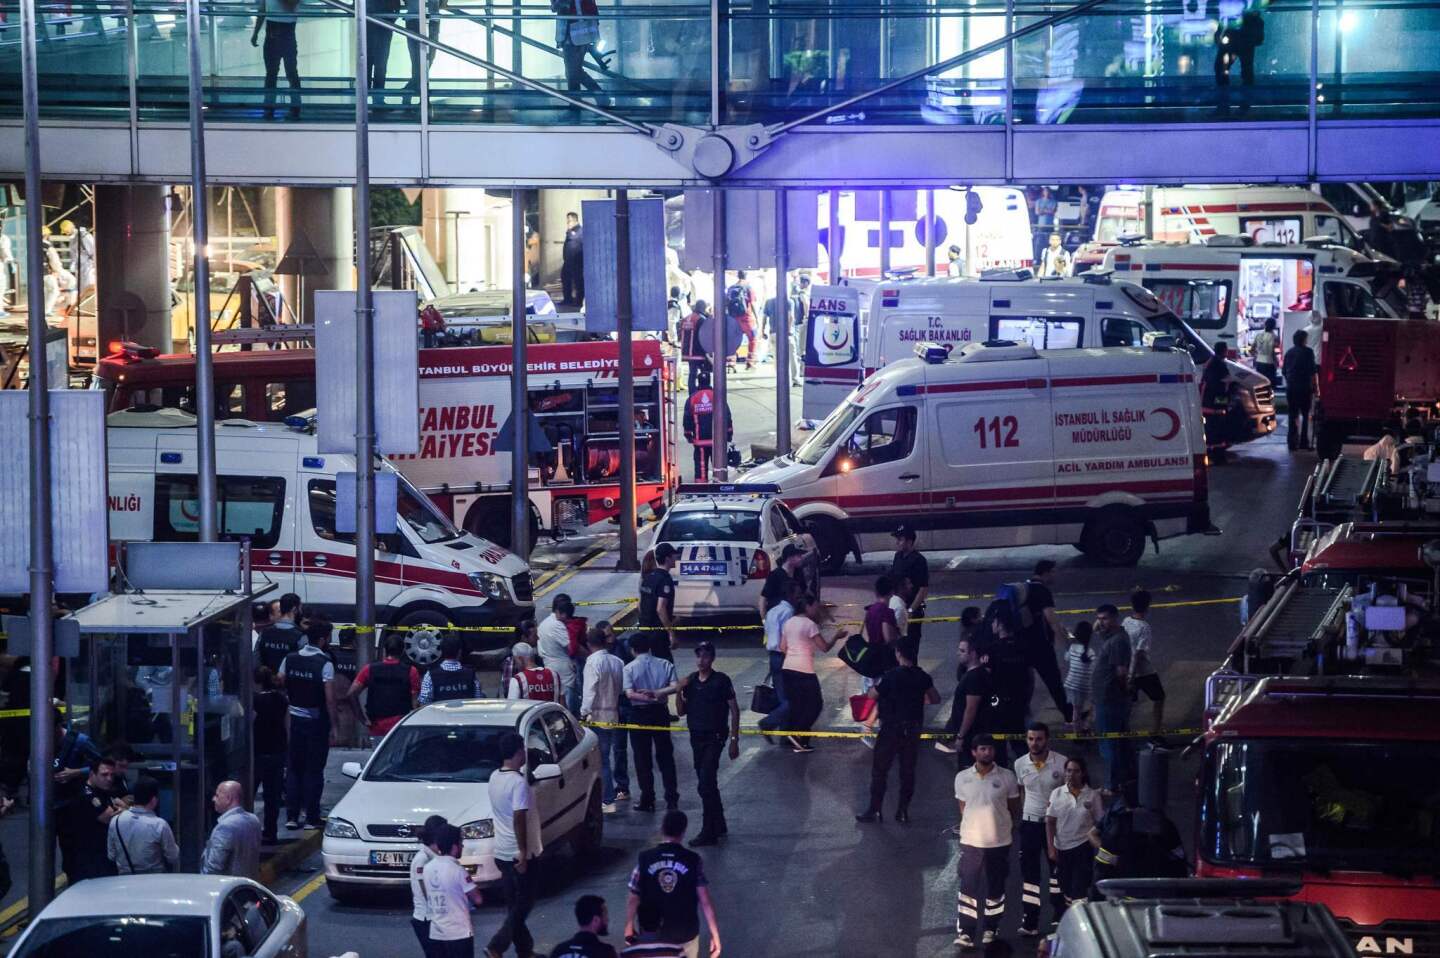 Forensic police work at the site of an explosion at Ataturk airport in Istanbul.